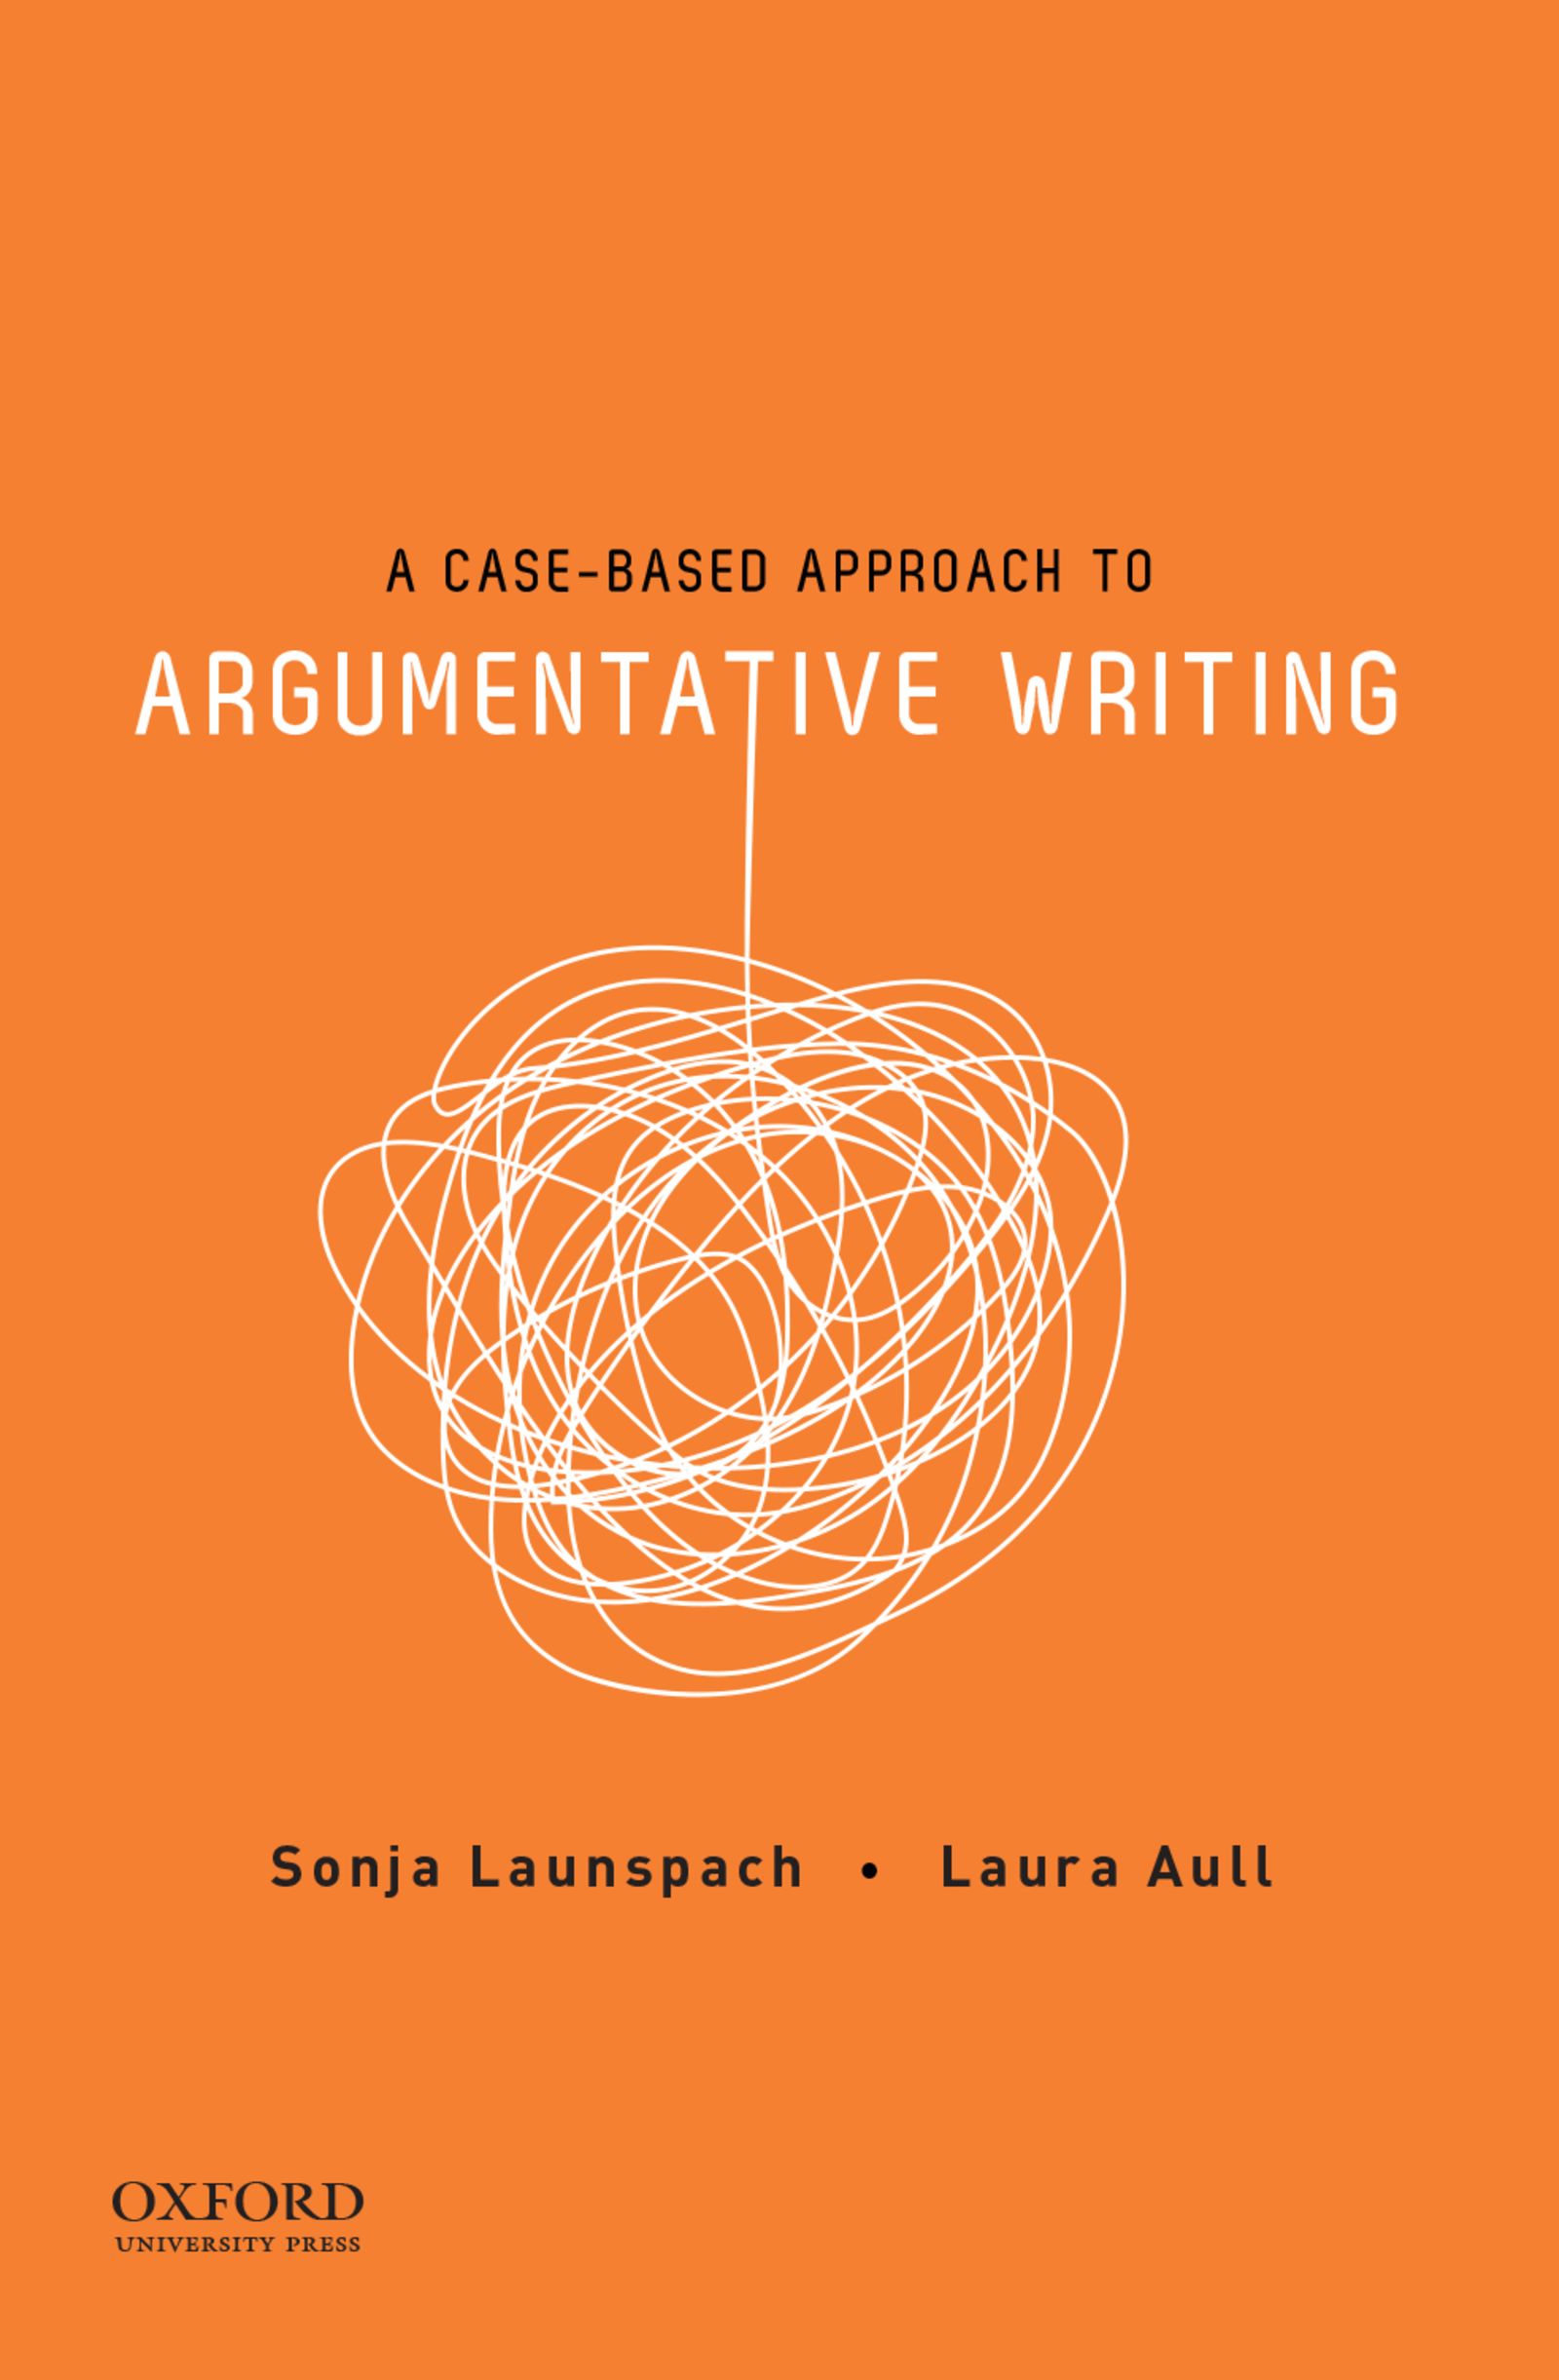 what argumentative writing technique is used when an author makes a case